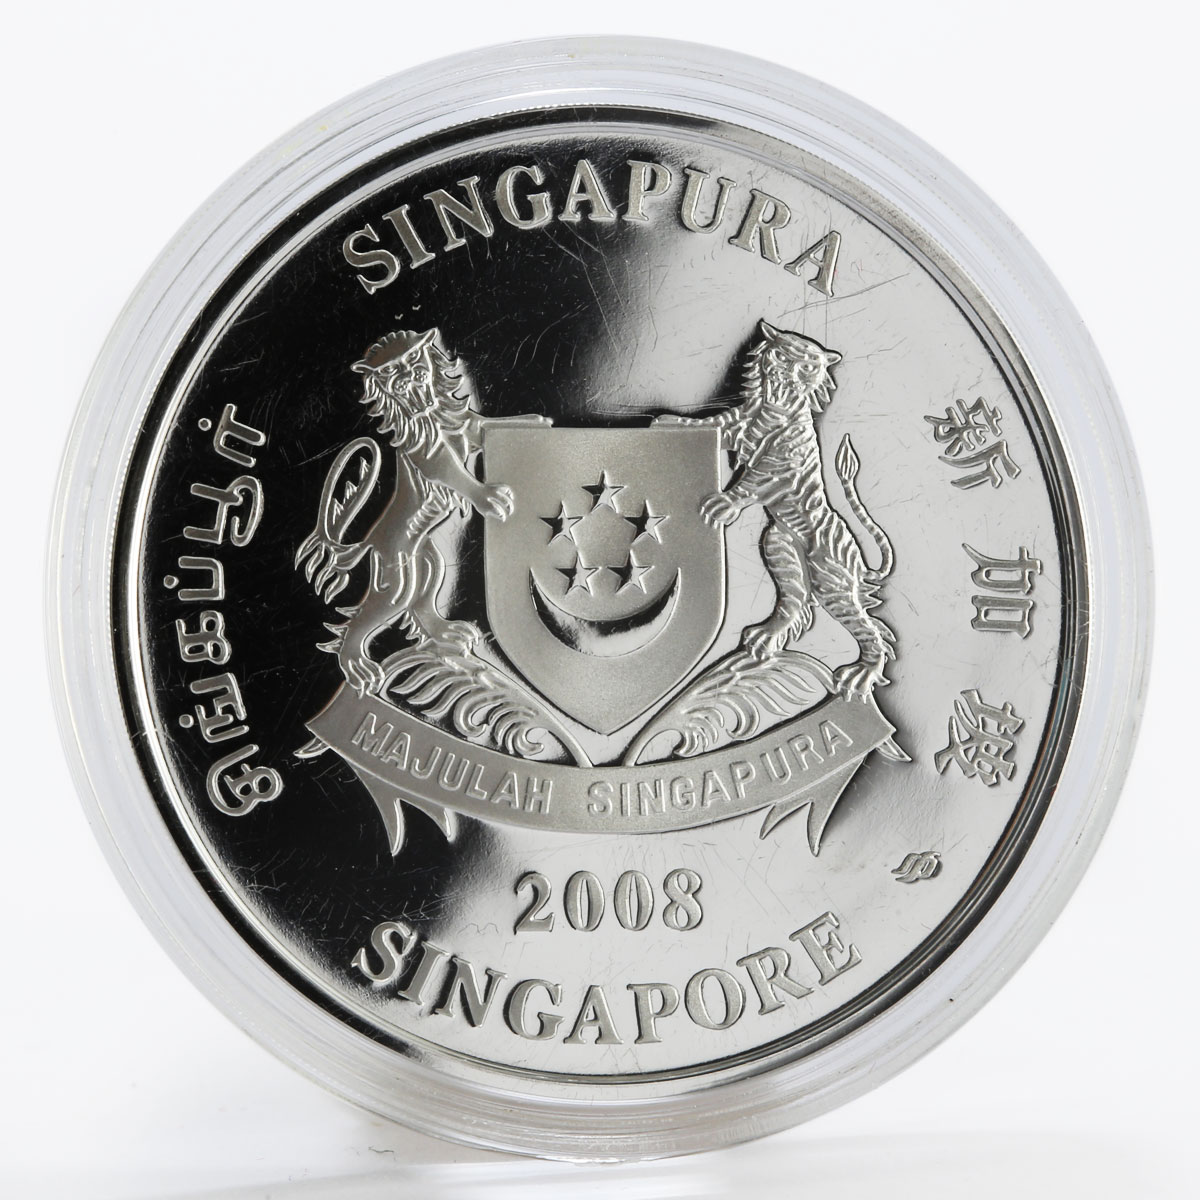 Singapore 5 dollars Flowers Aranda Tay Swee Eng colored silver proof coin 2008